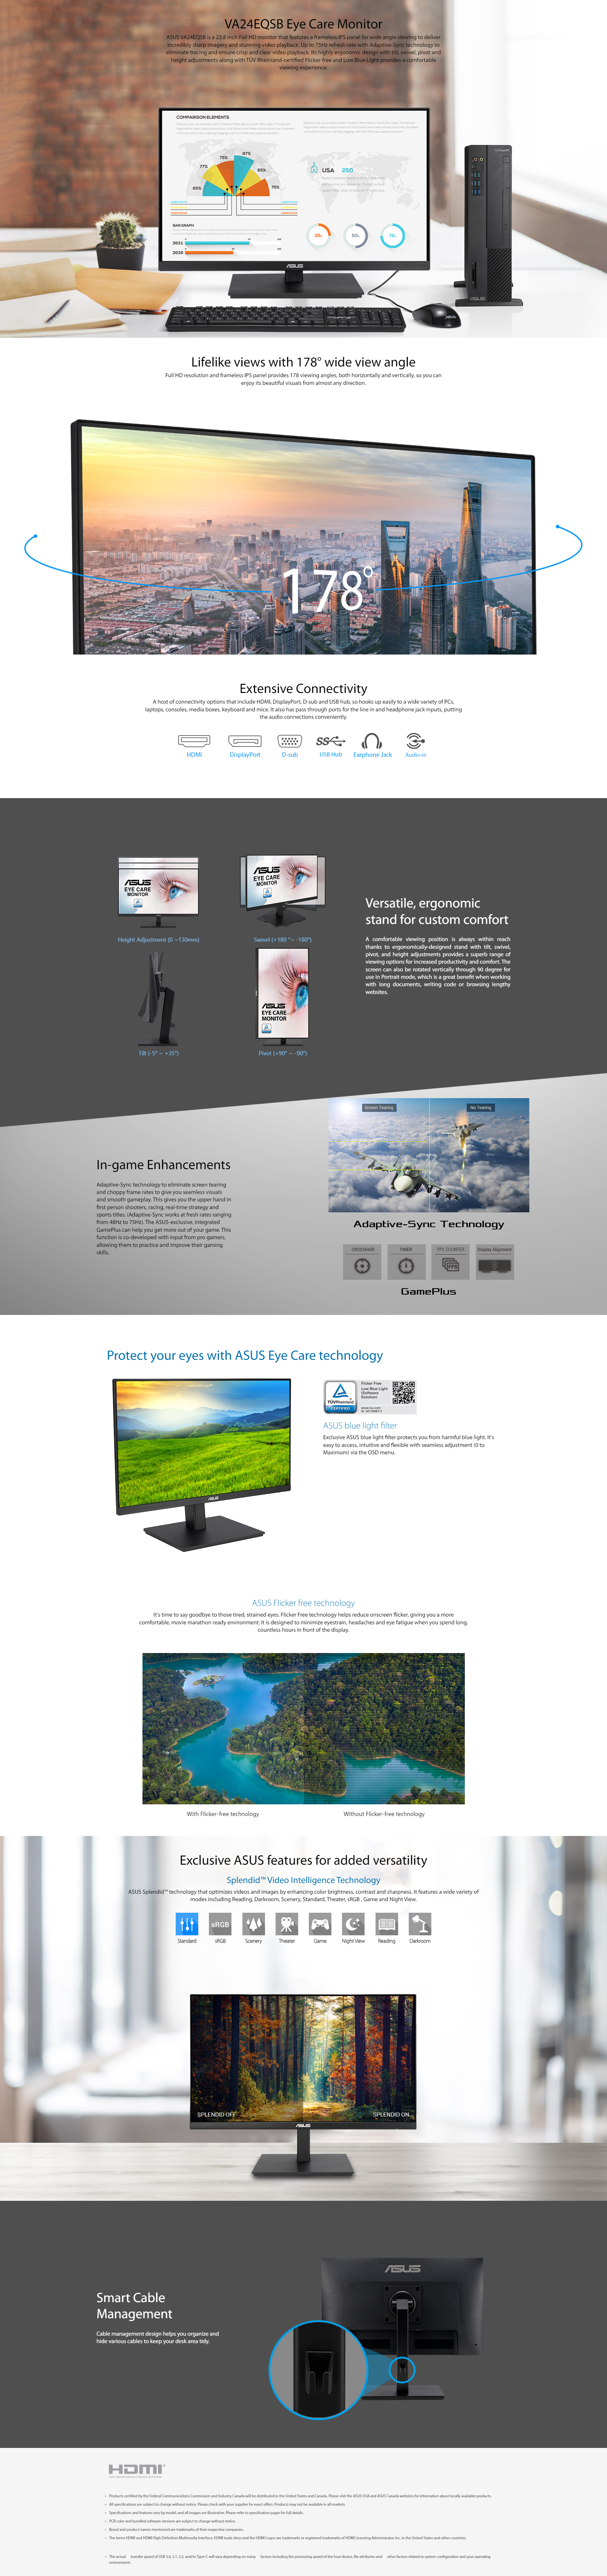 A large marketing image providing additional information about the product ASUS VA24EQSB 23.8" FHD 75Hz IPS Monitor - Additional alt info not provided